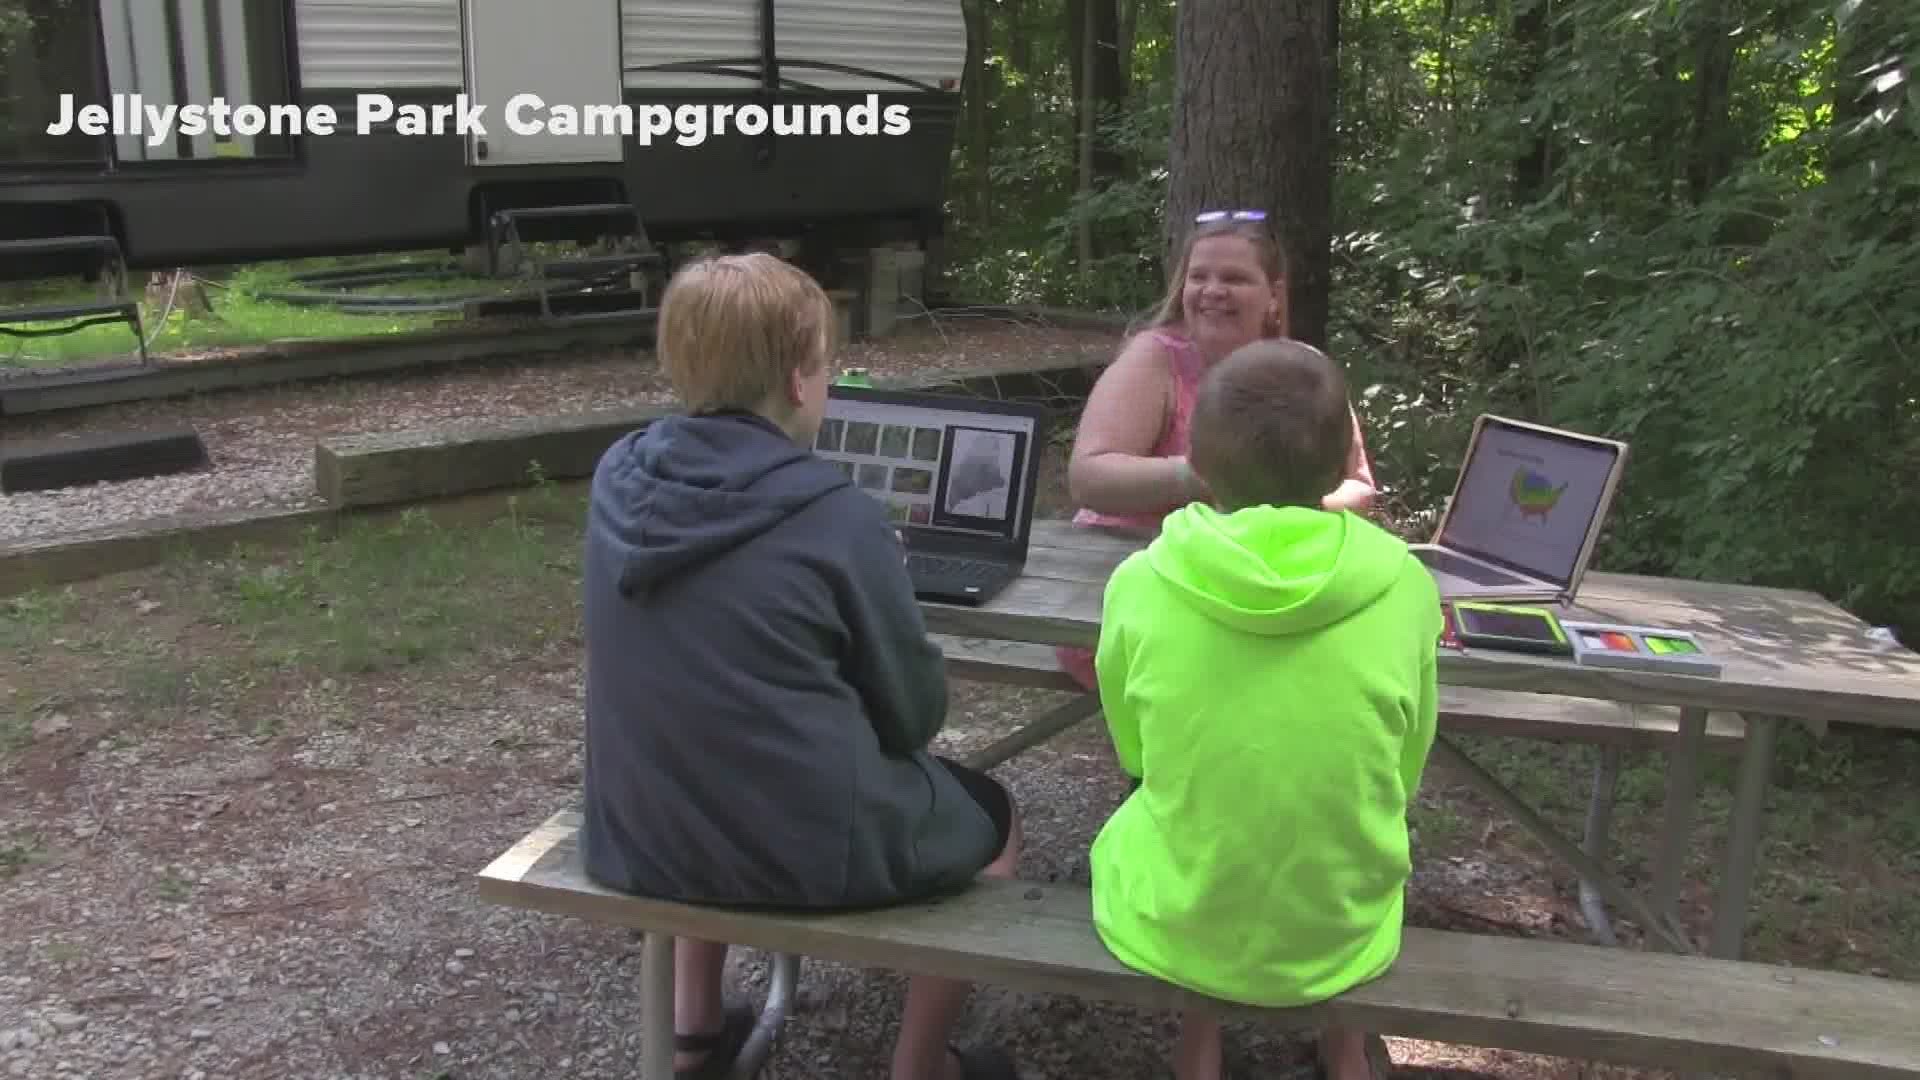 Hilton suggests finding family oriented campgrounds that offer educational activities outside of schoolwork, or looking online for printable nature lessons.